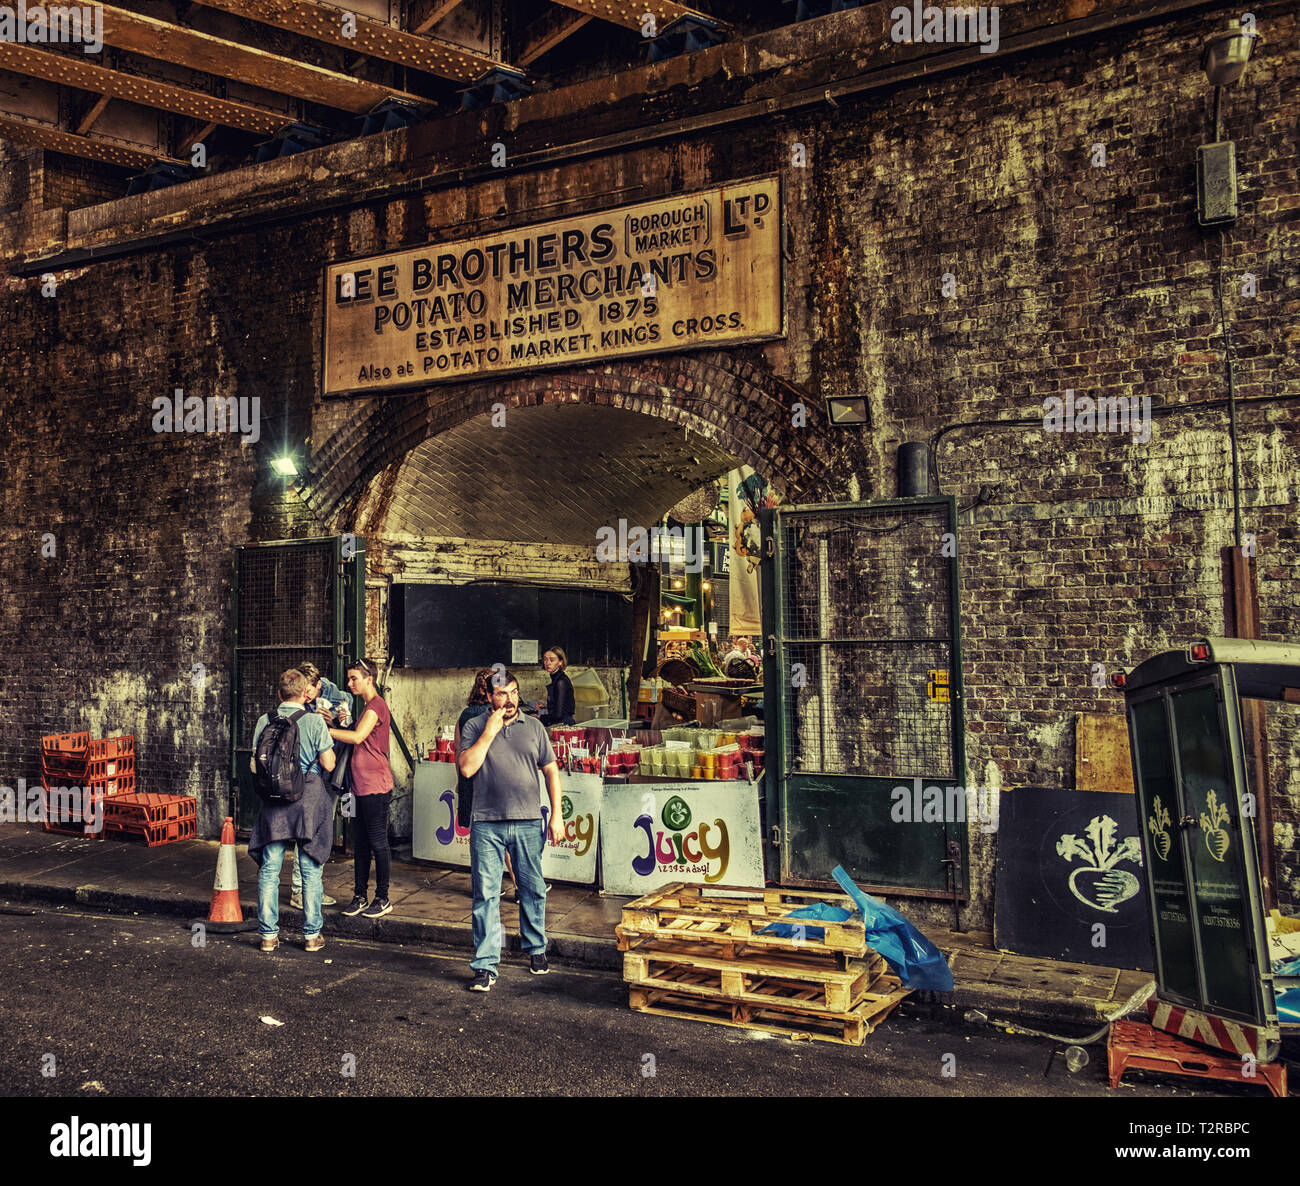 London, UK, Aug 2018, urban scene at Borough Market with an old business advertising sign above a brick arch, England Stock Photo